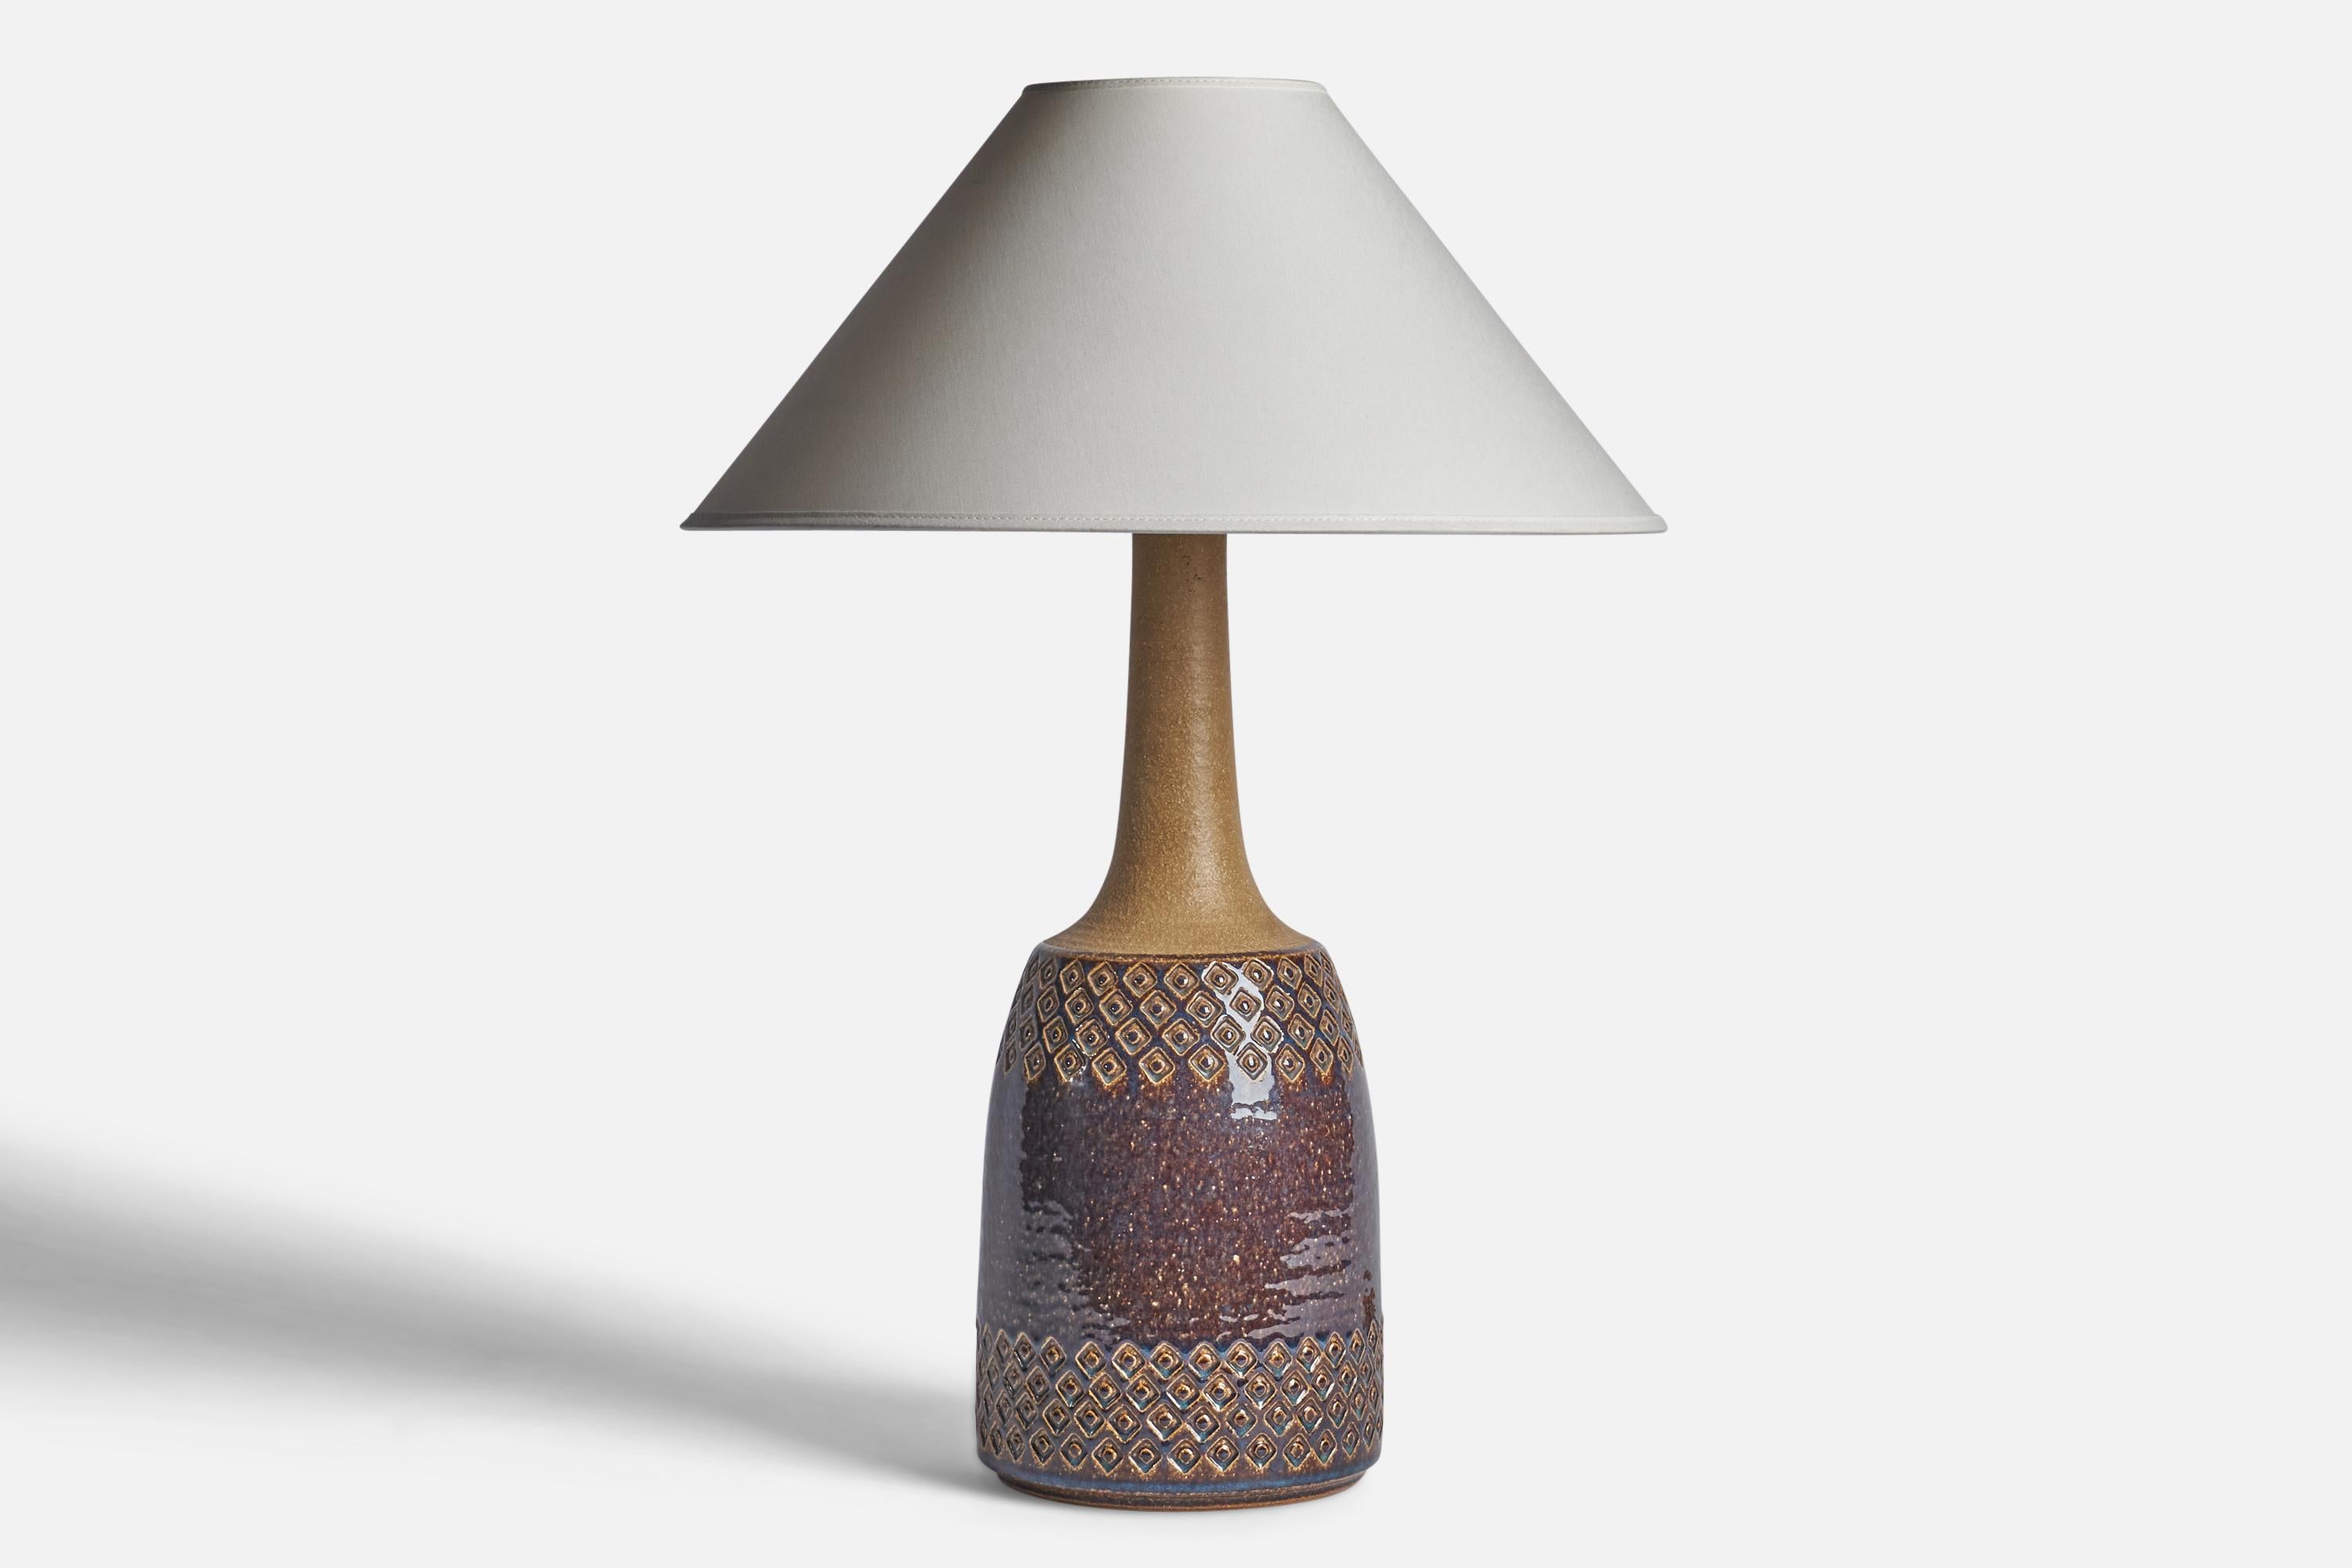 A brown and beige-glazed stoneware table lamp designed and produced by 
Søholm, Bornholm, Denmark, 1960s.

Dimensions of Lamp (inches): 18 H x 6.75” Diameter
Dimensions of Shade (inches): 4.5” Top Diameter x 16” Bottom Diameter x 7.25” H
Dimensions